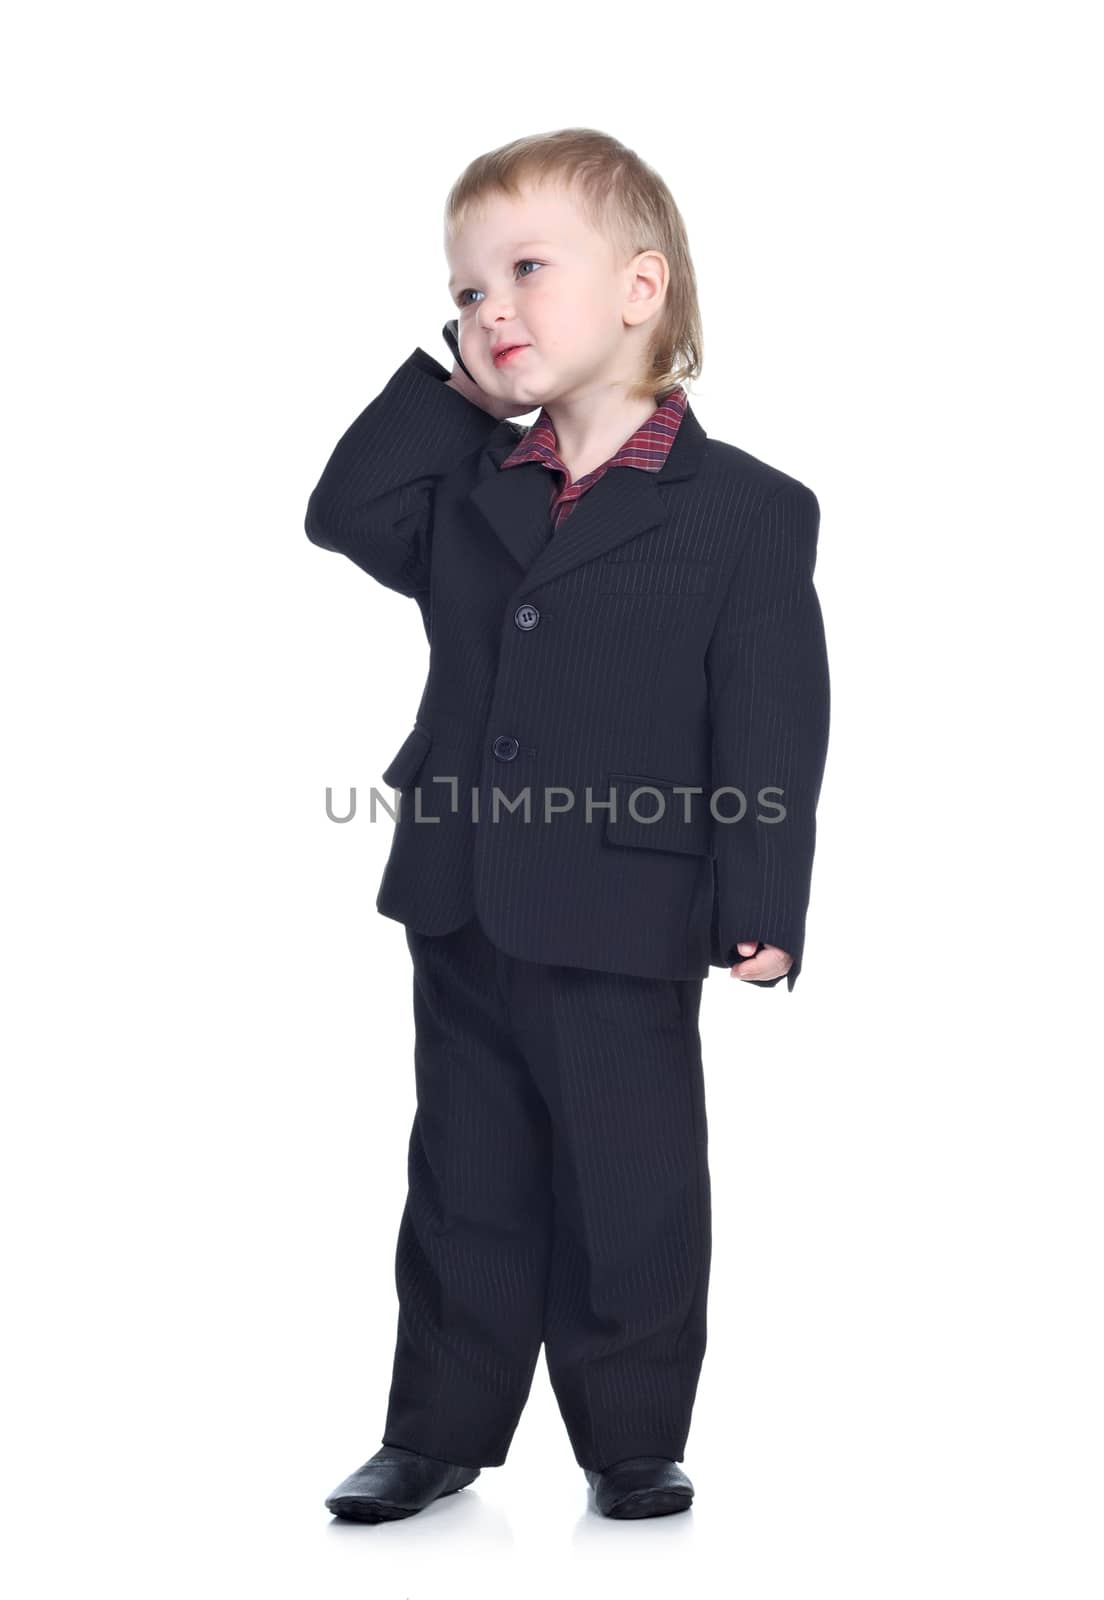 Little businessman with a phone isolated on the white